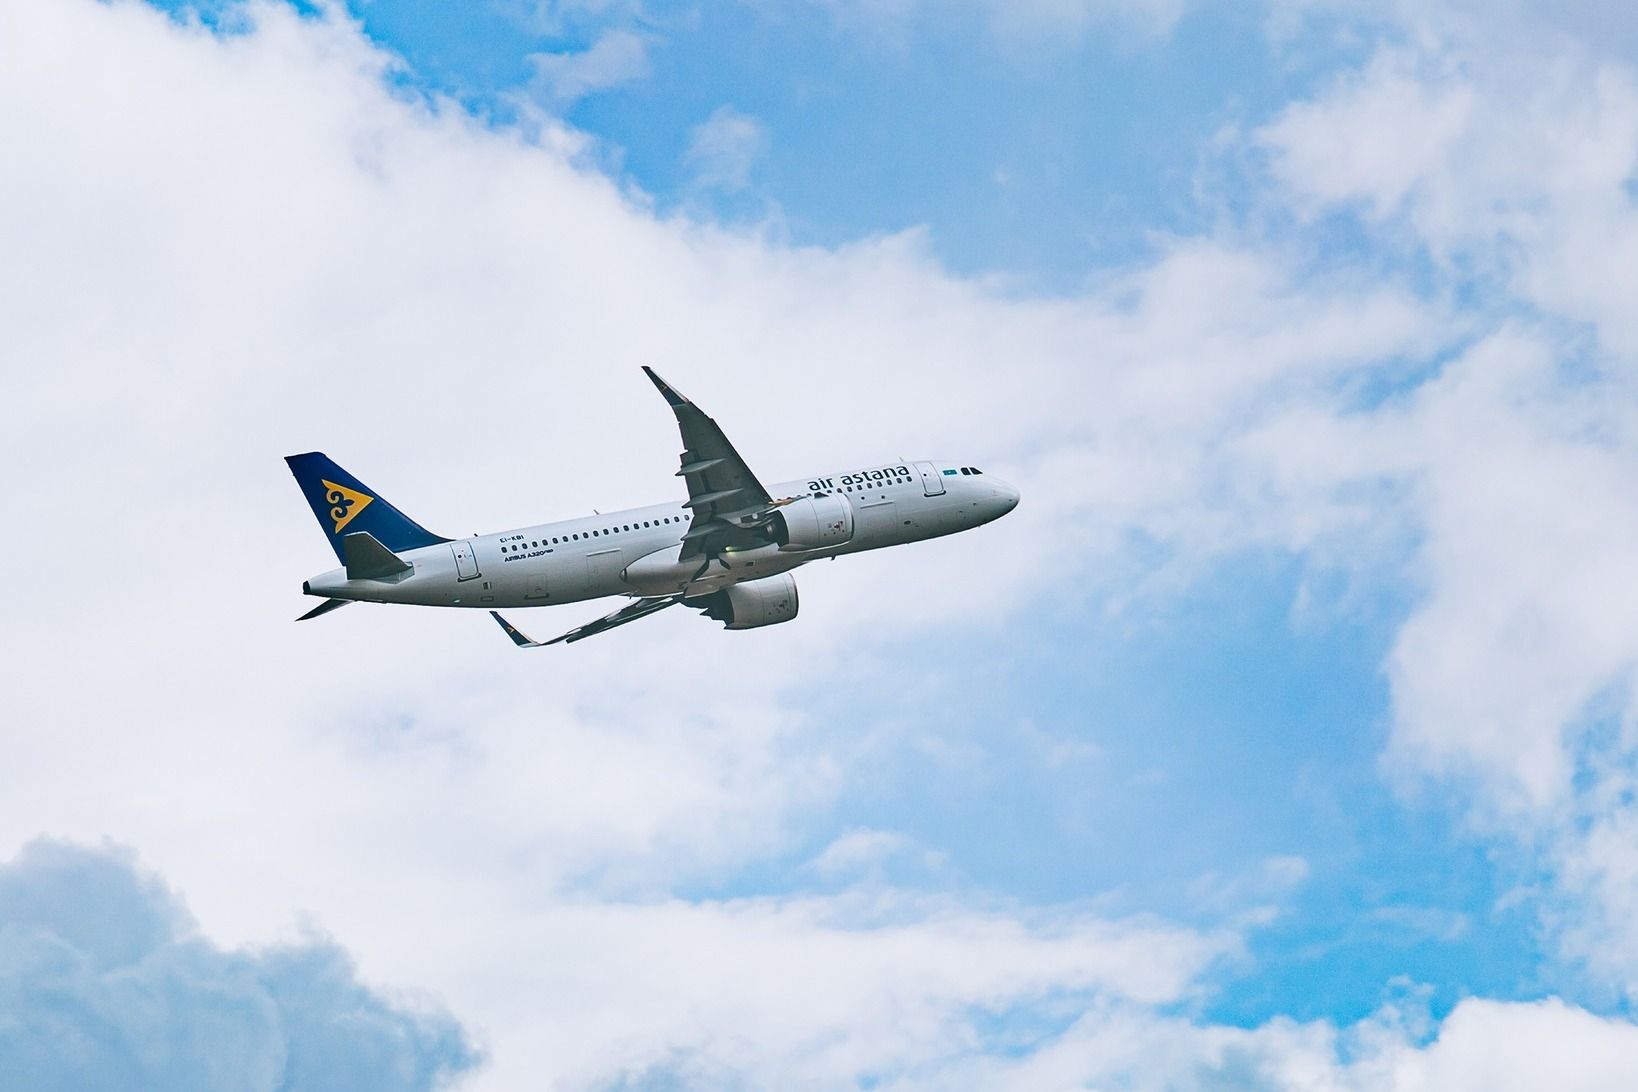 Air Astana Airbus A320neo taking off.